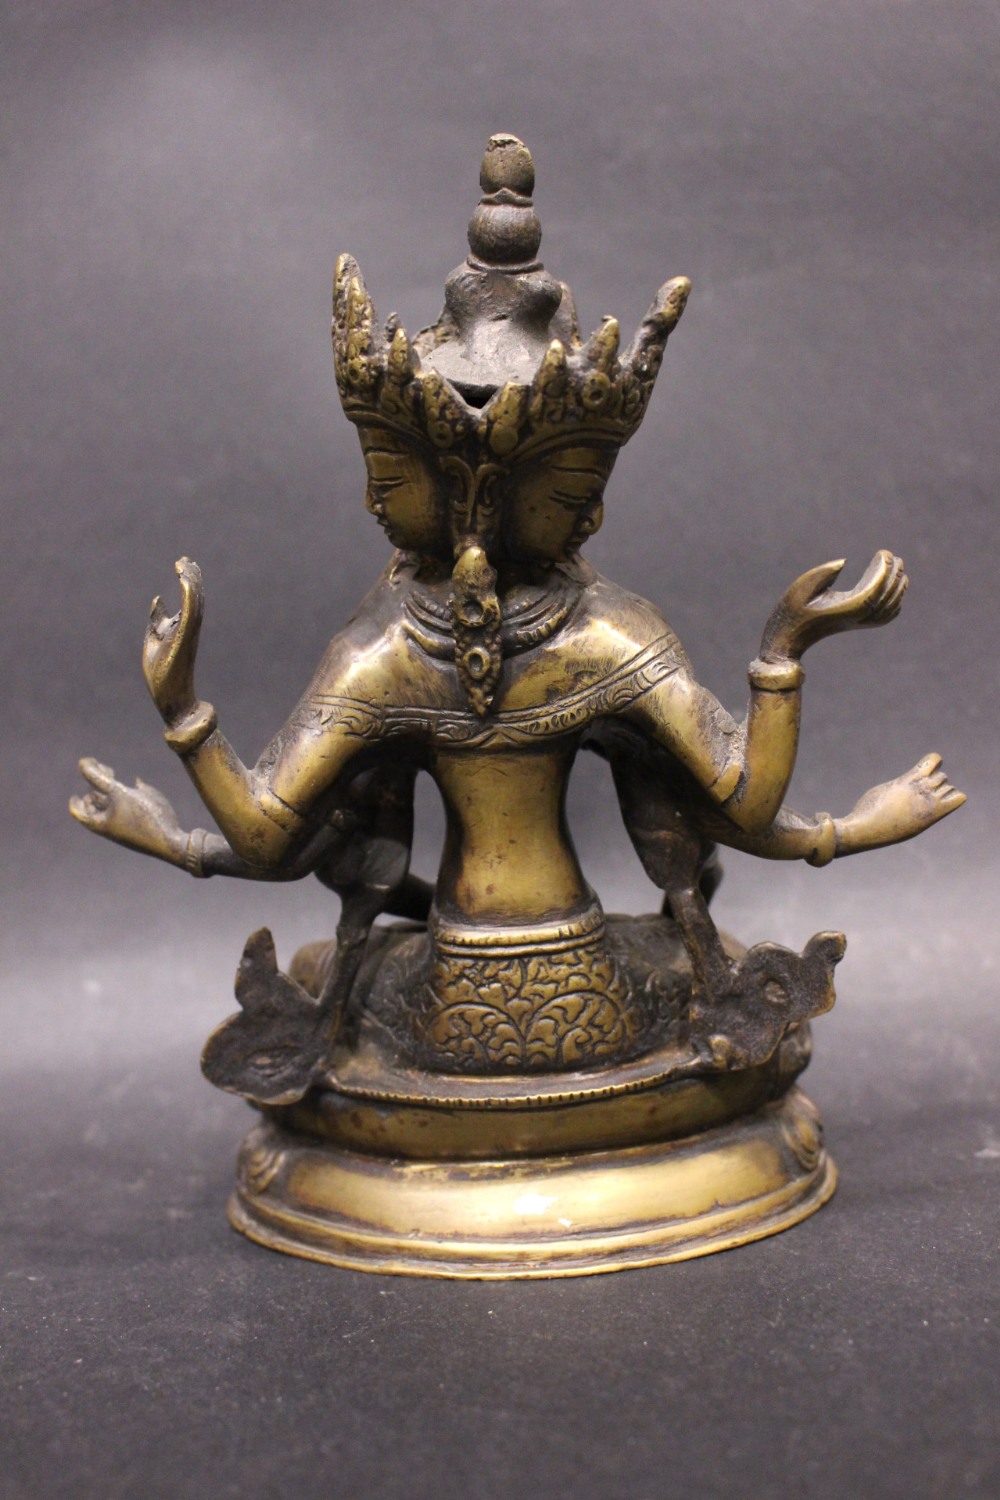 A BRASS FIGURE OF THE BUDDHIST DIETY USHNISHAVIJAYA, with three heads and 8 arms, sitting in the - Image 3 of 3